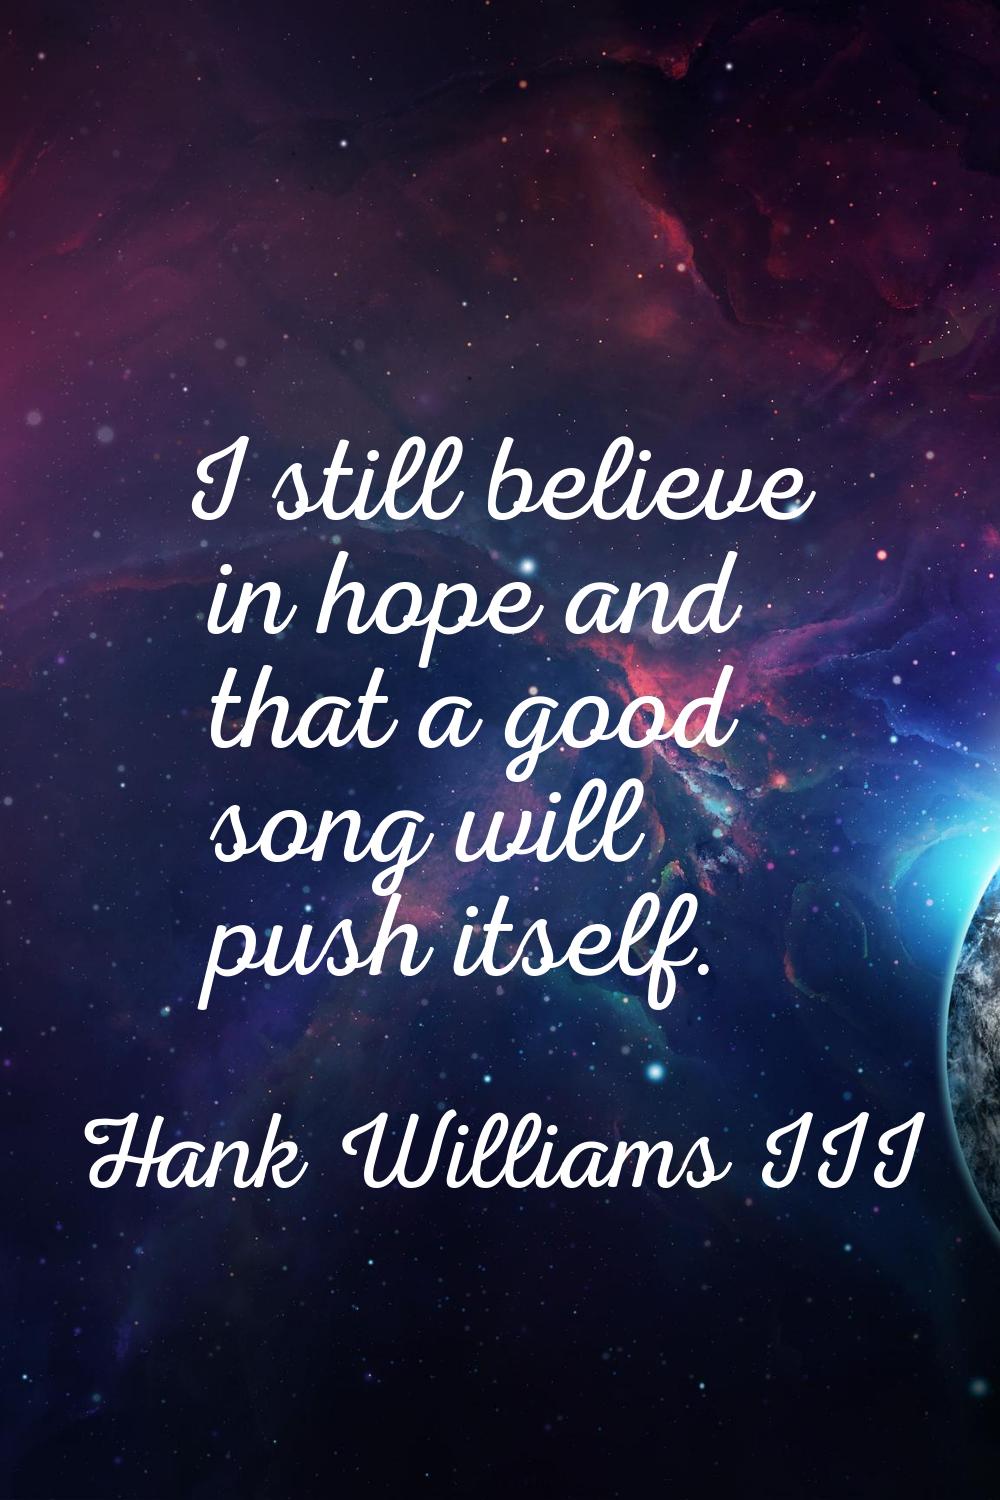 I still believe in hope and that a good song will push itself.